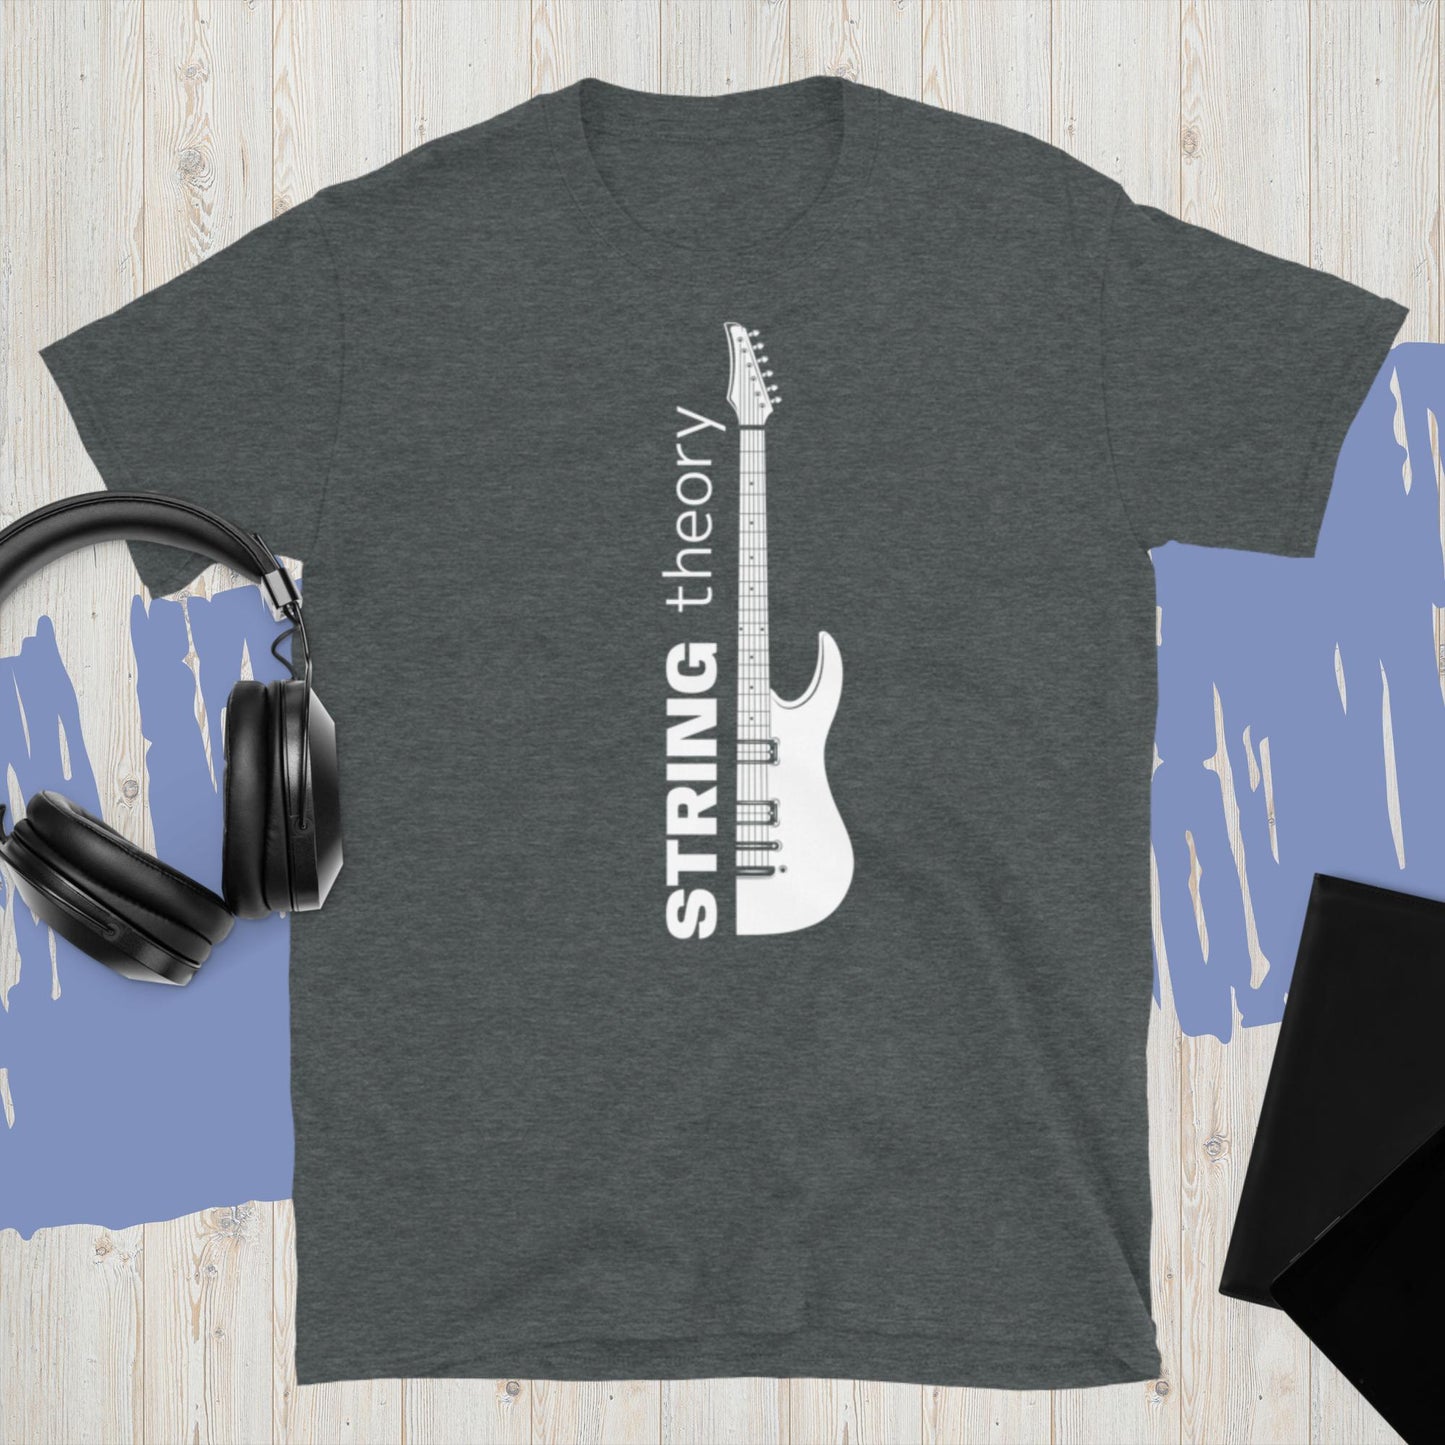 String theory. Fun T-shirt for guitarists.